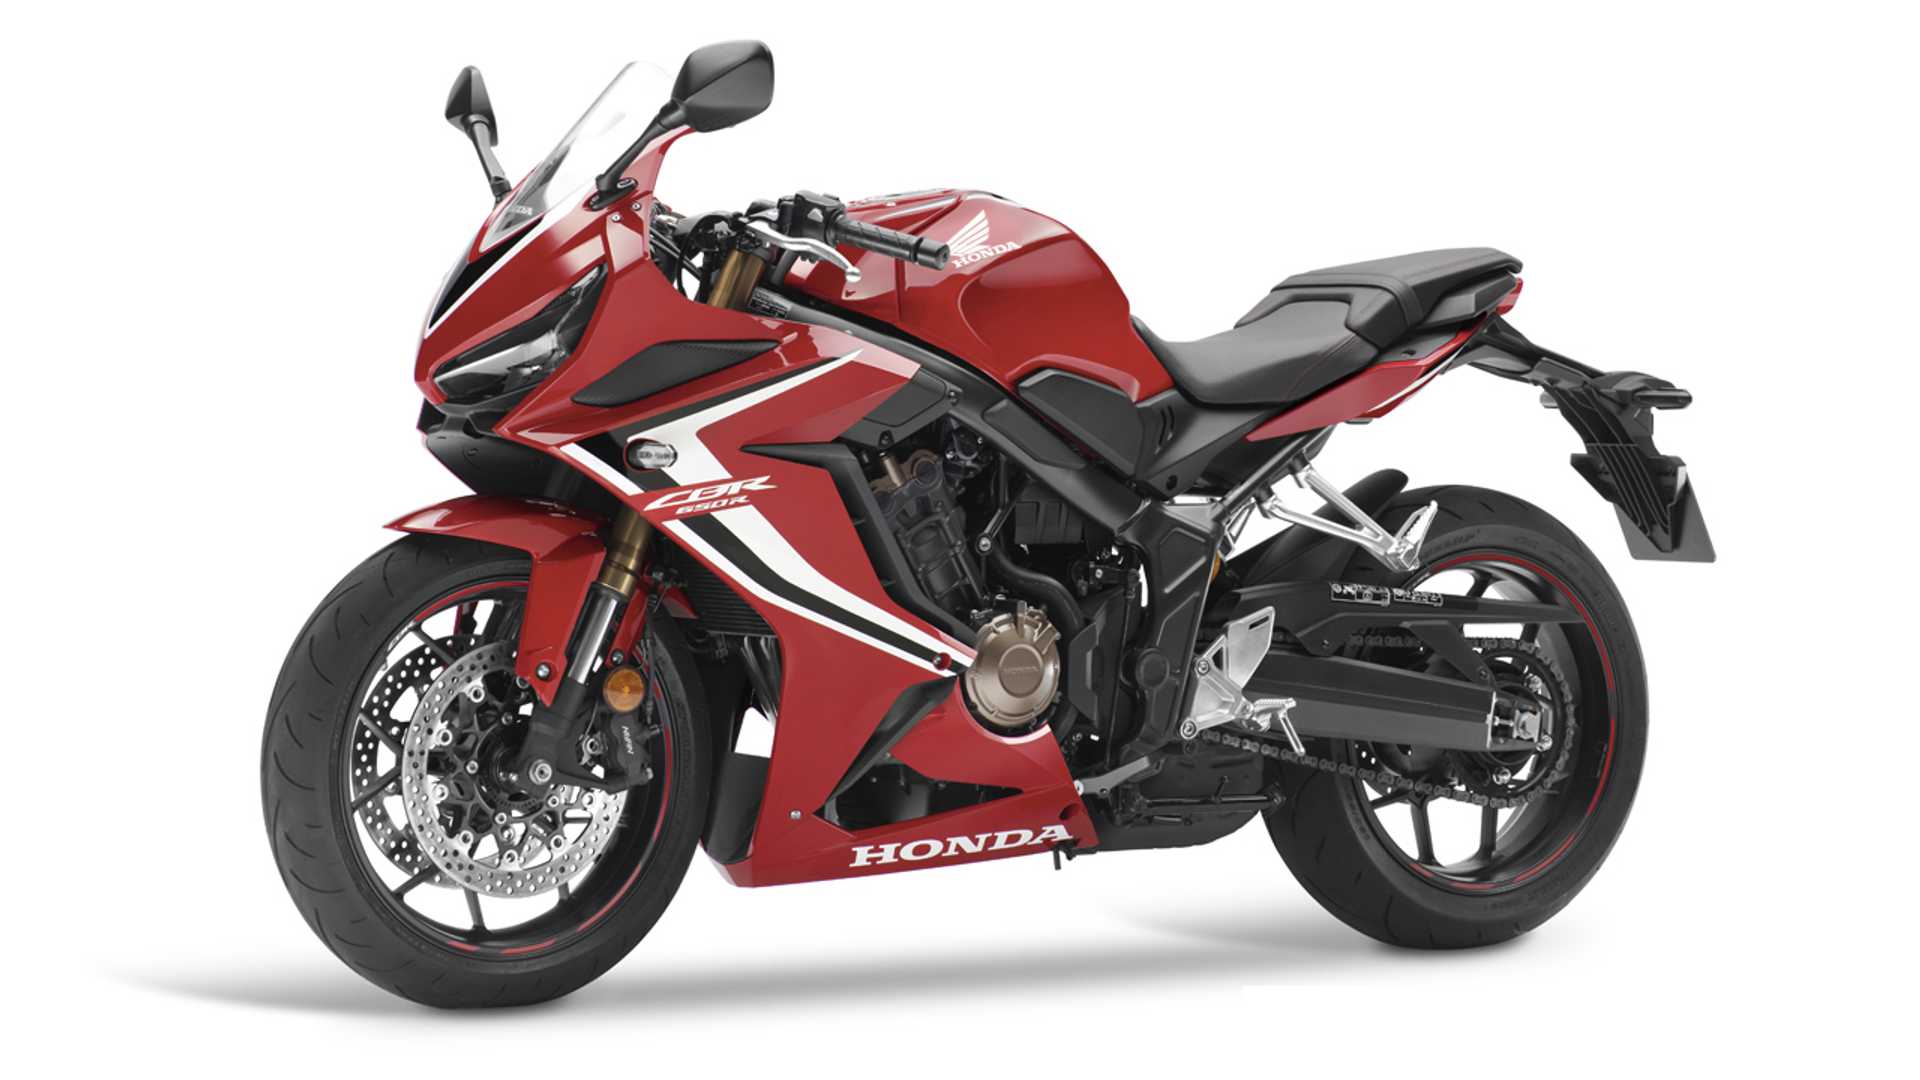 2019 Honda CBR650R Bookings Open In India For Rs 15000